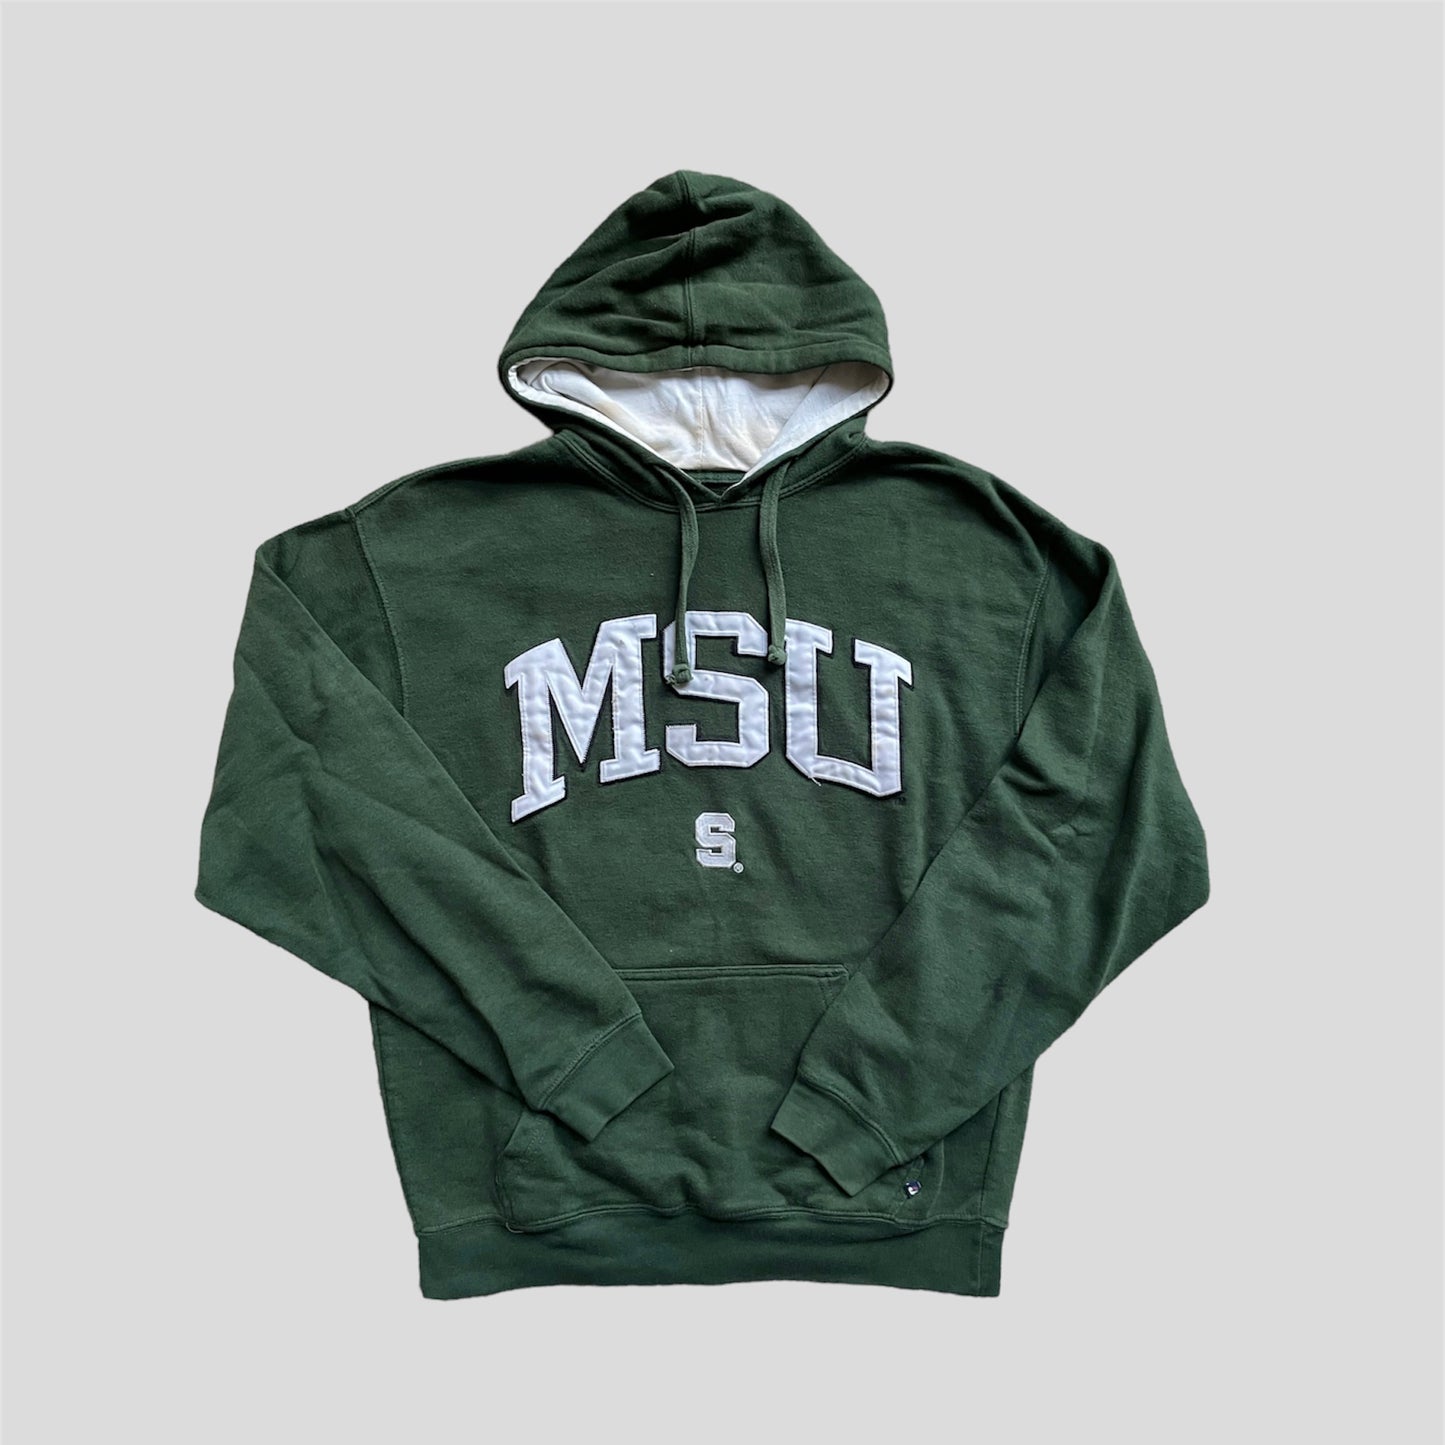 MSU Patch Letter Hoodie